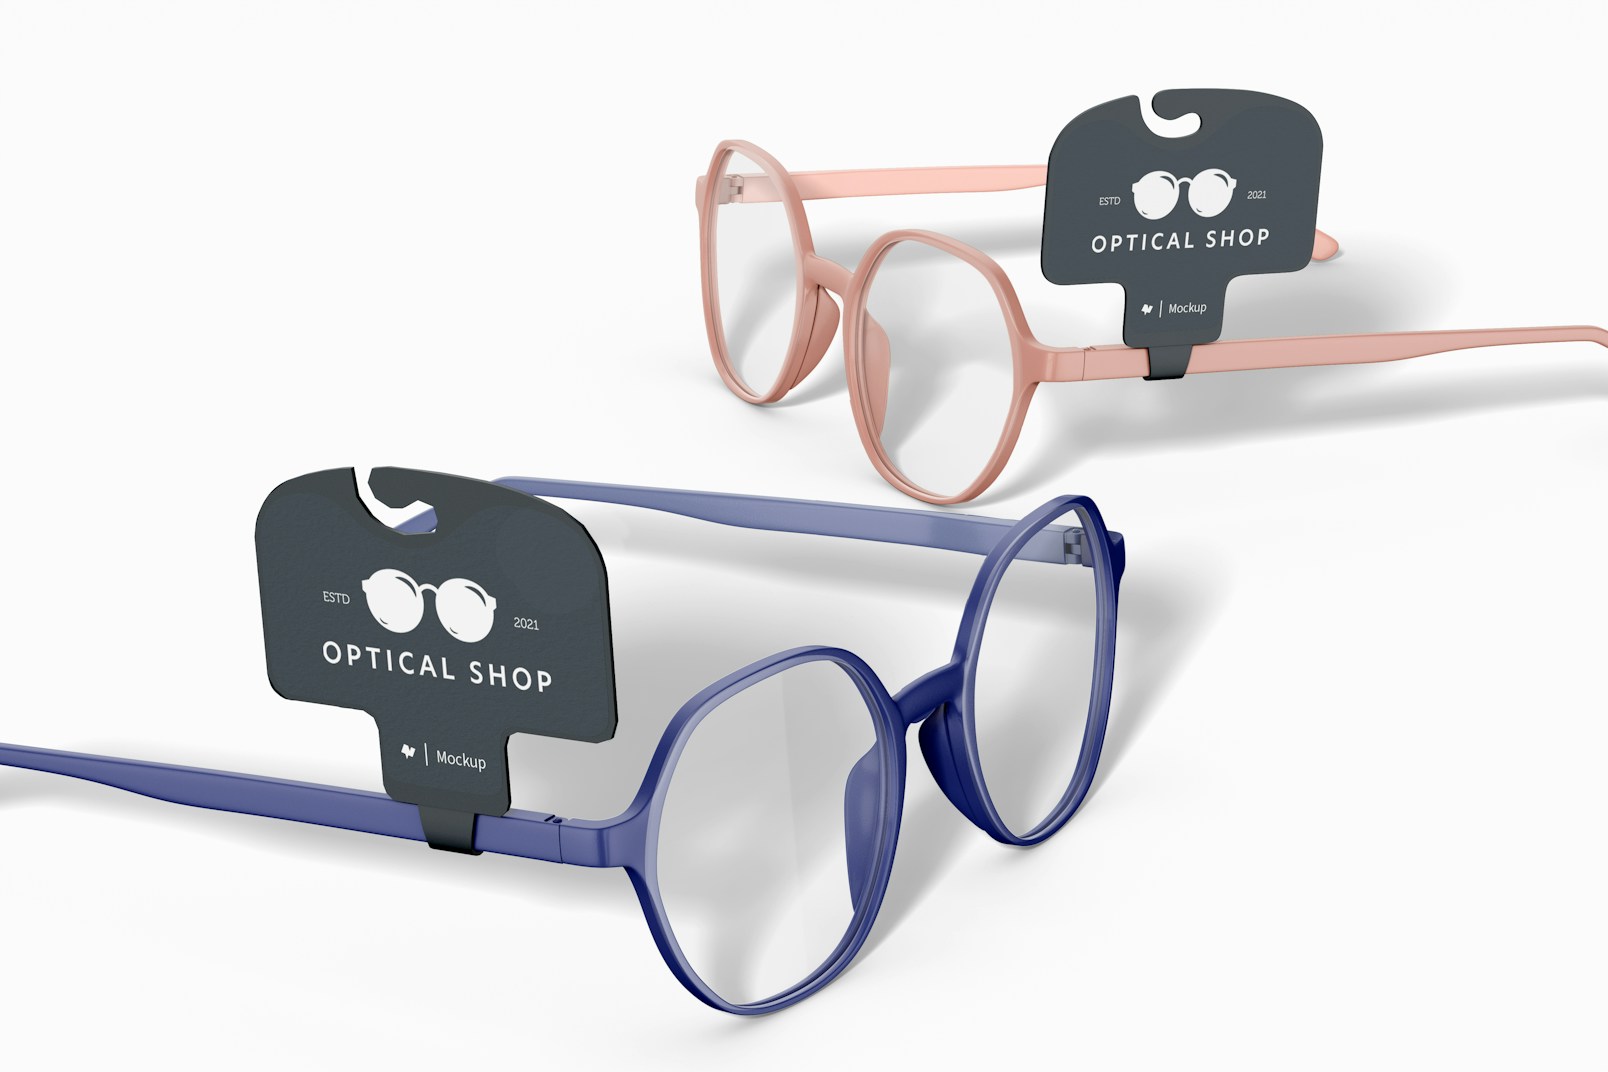 Eyeglasses with Tags Mockup, Side View